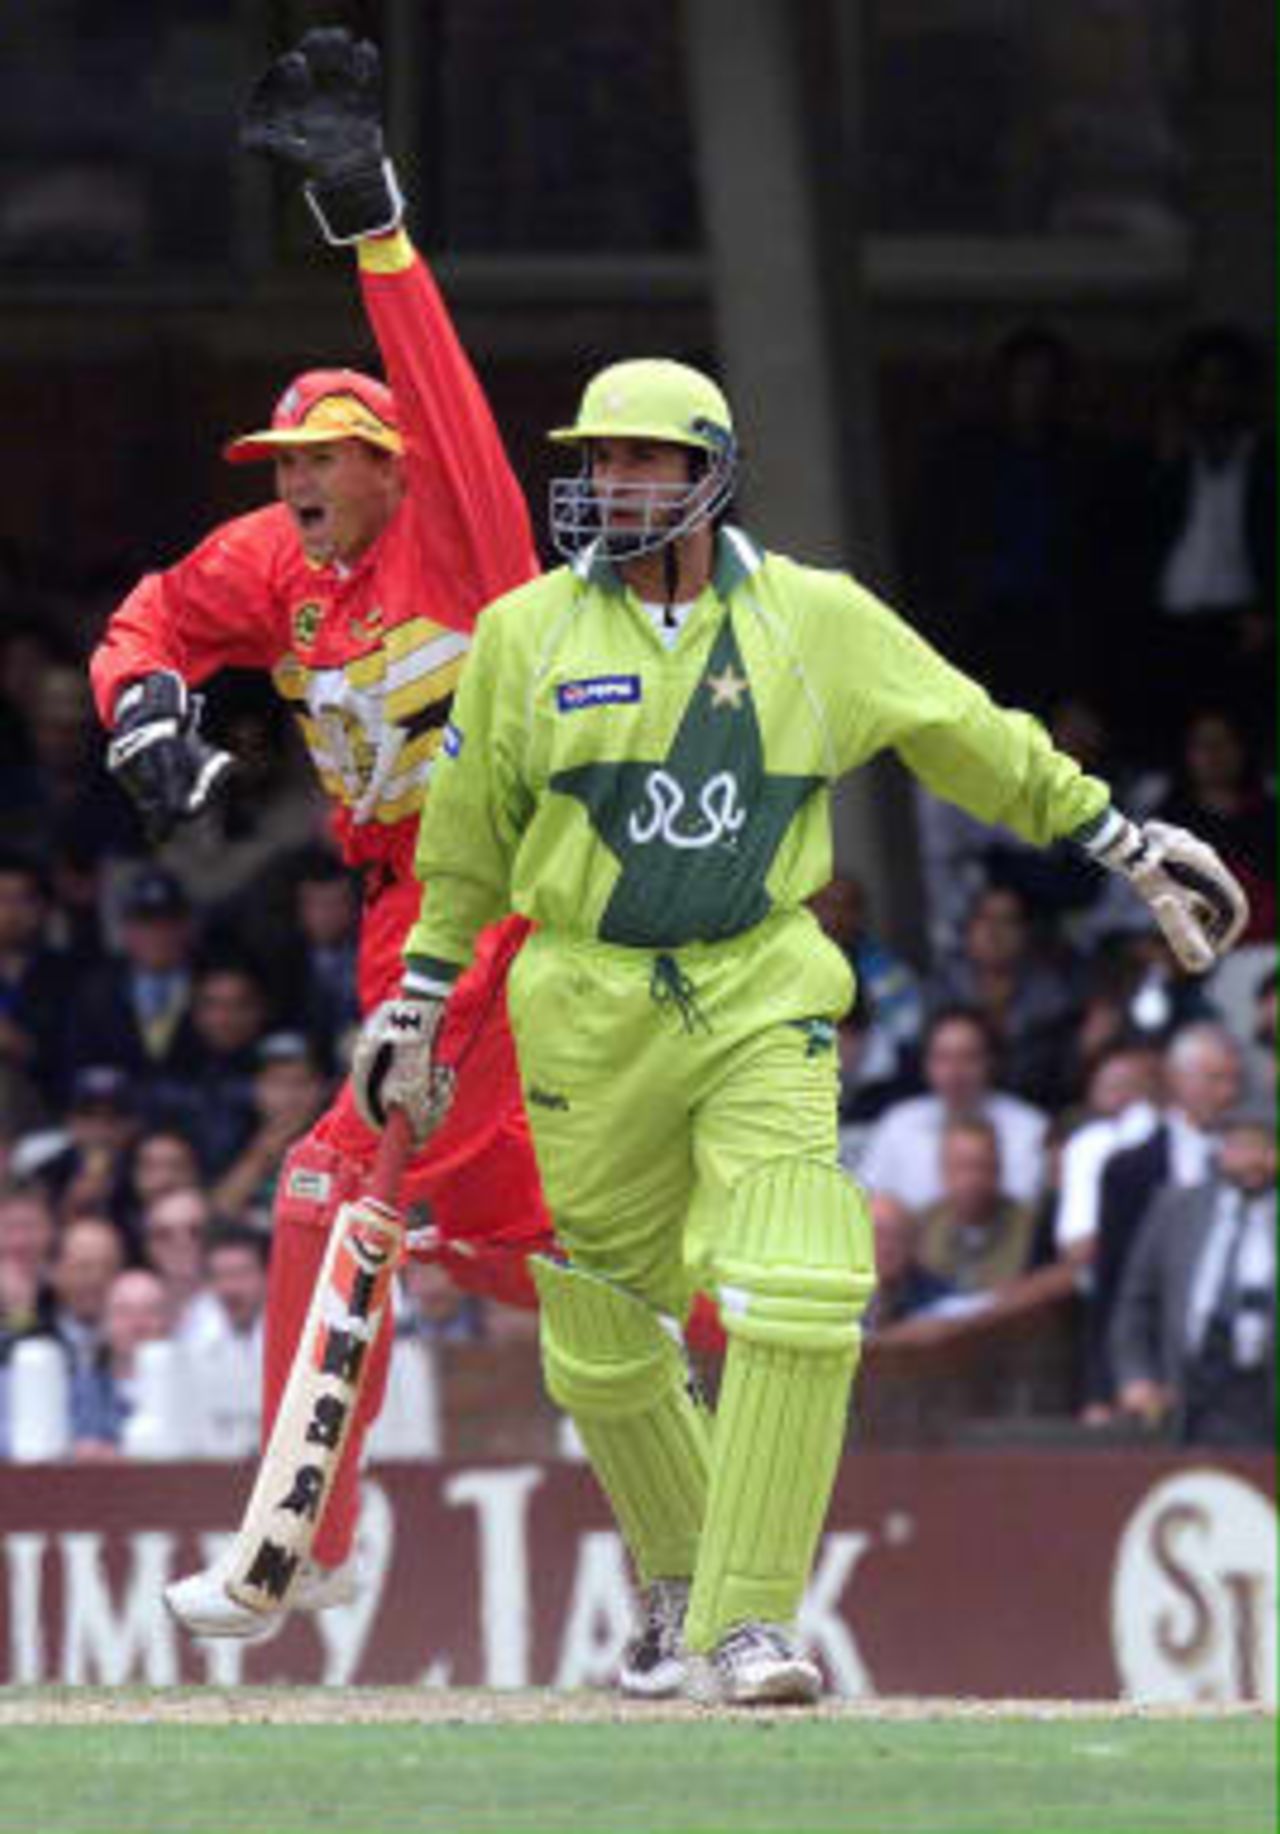 Zimbabwe wicket keeper Andy Flowers celebrates as Wasim Akram, captain of Pakistan, is out lbw off  Adam Huckle bowling, without scoring  any runs against Zimbabwe at the Cricket World Cup match  at the Oval, London, 11 June 1999